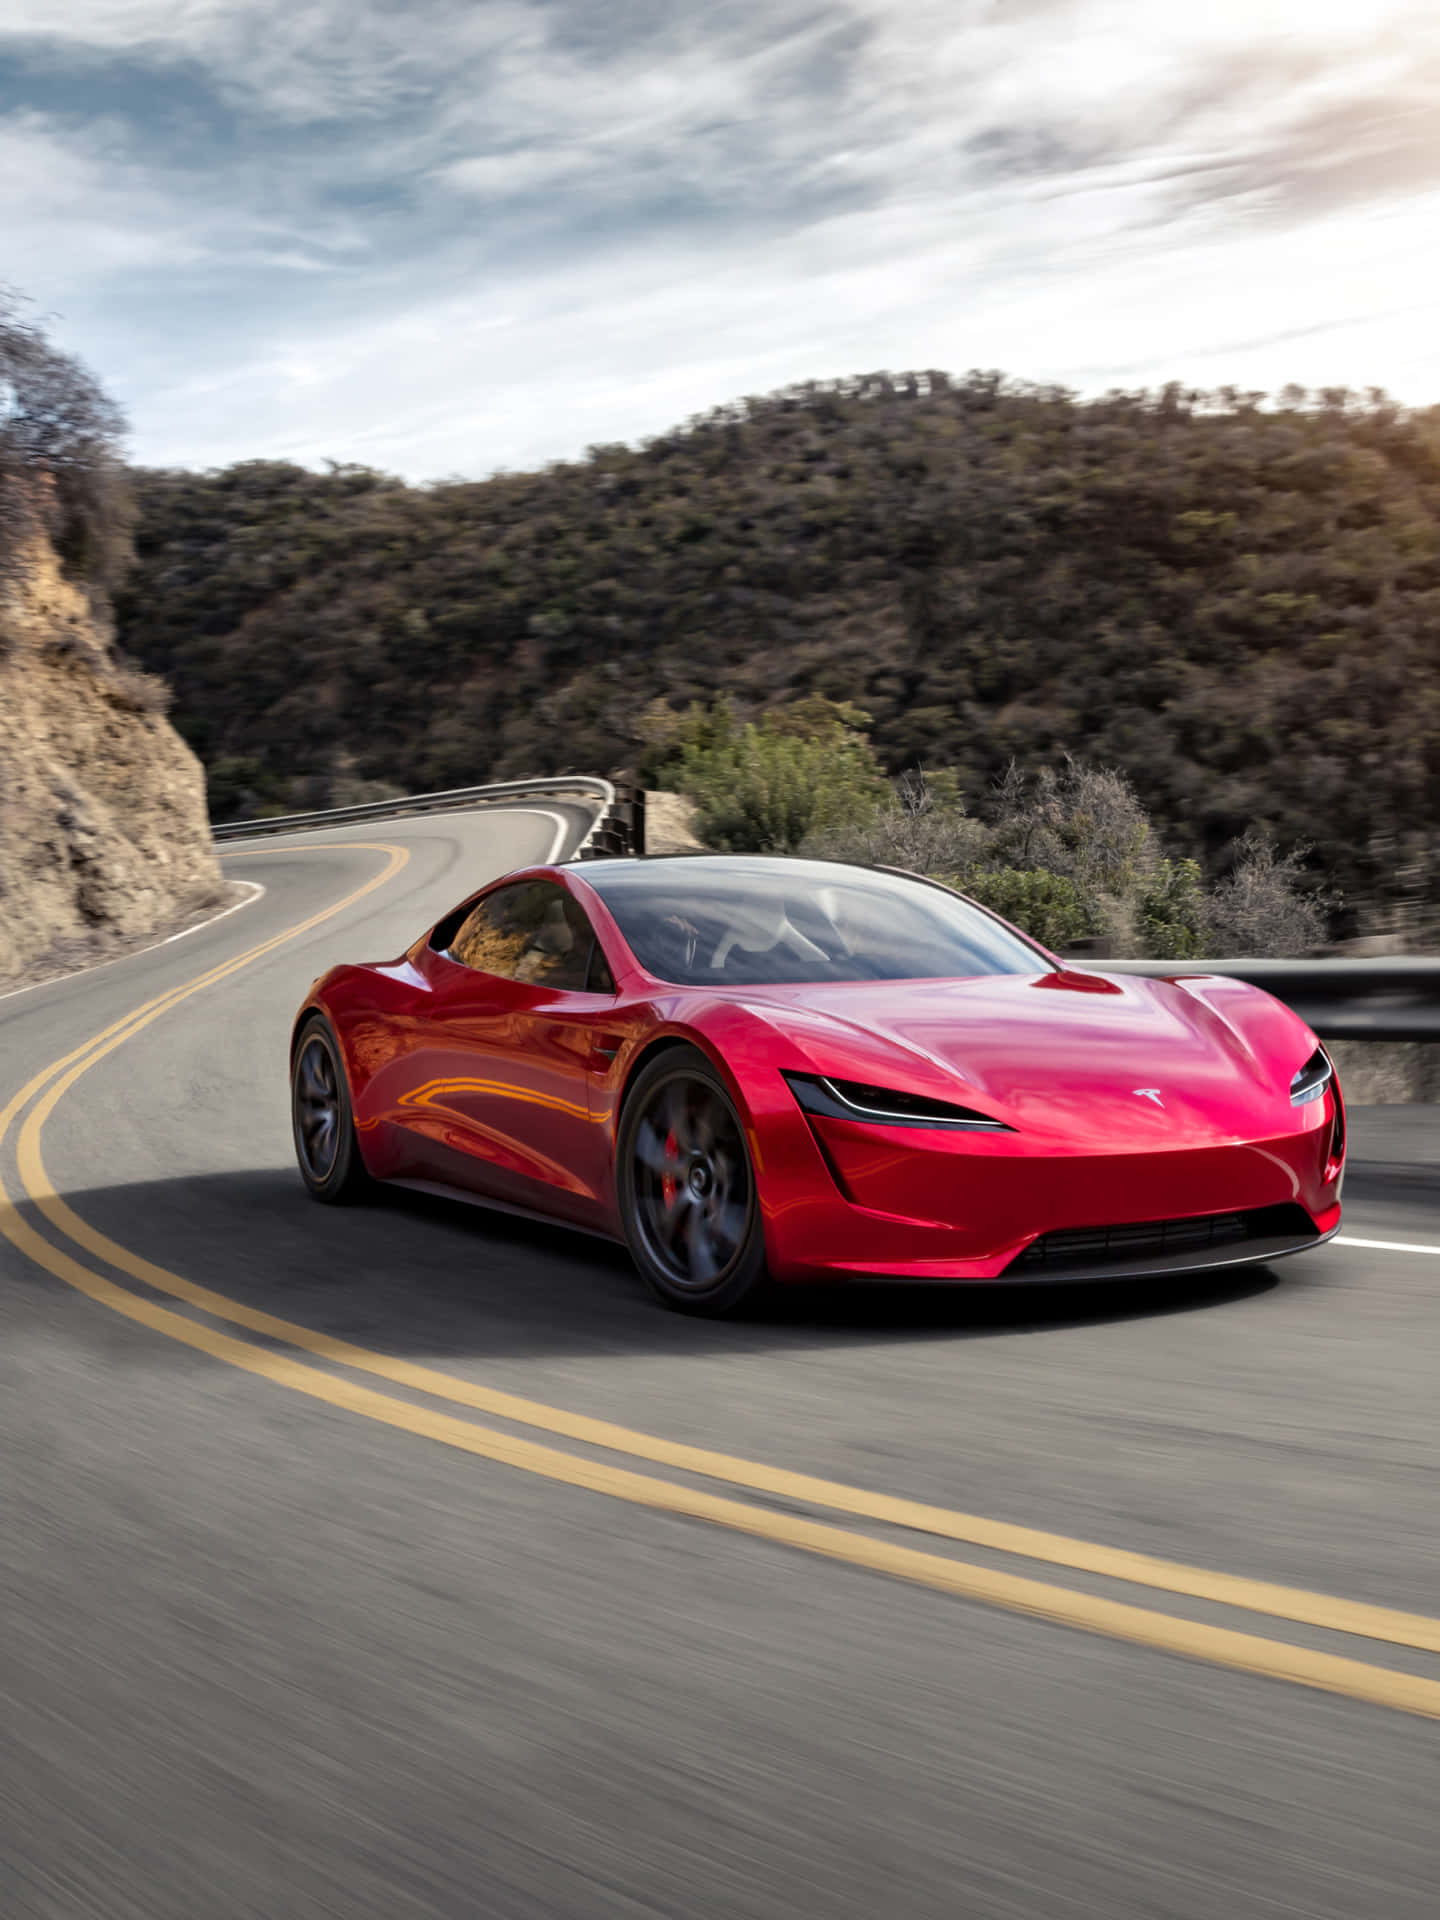 The Red Tesla E-sports Car Is Driving Down A Mountain Road Wallpaper